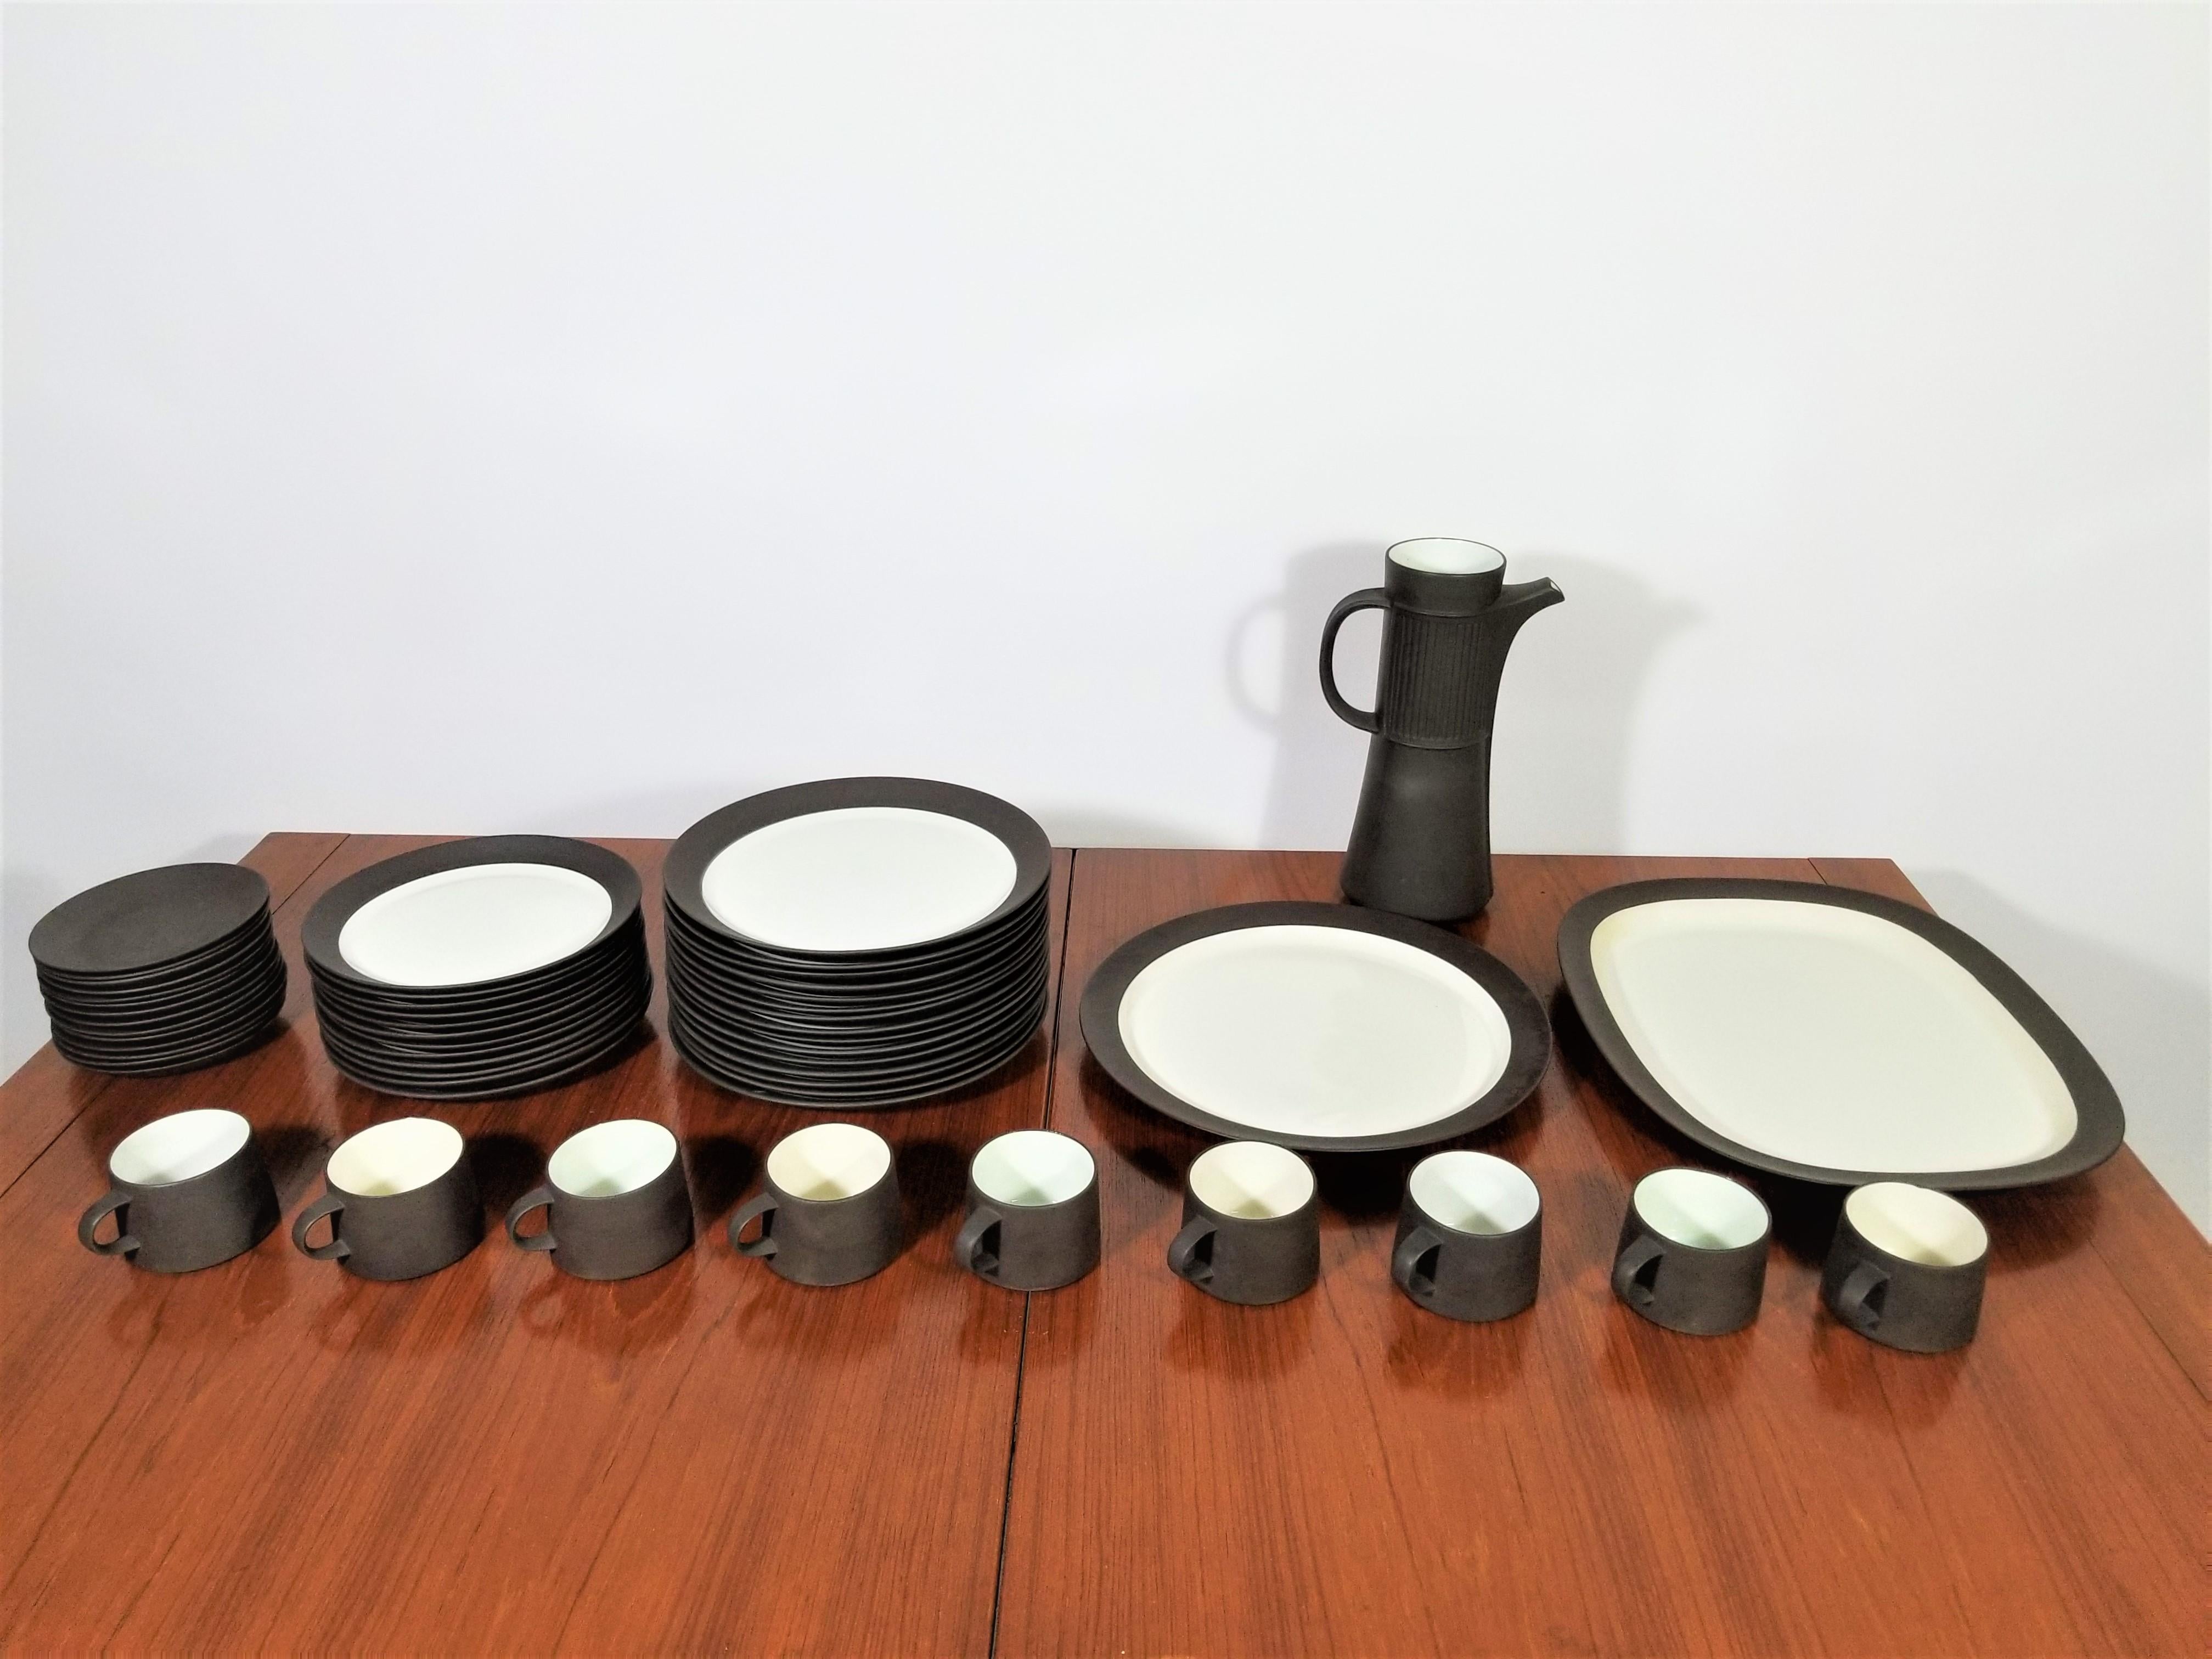 Gorgeous Mid-Century black and white 1960s JHQ Jens Quistgaard for Dansk, Denmark flamestone dinnerware serving set. 53 pieces total. All pieces are marked and in exceptional excellent condition.
Complimentary free delivery can be arranged for this